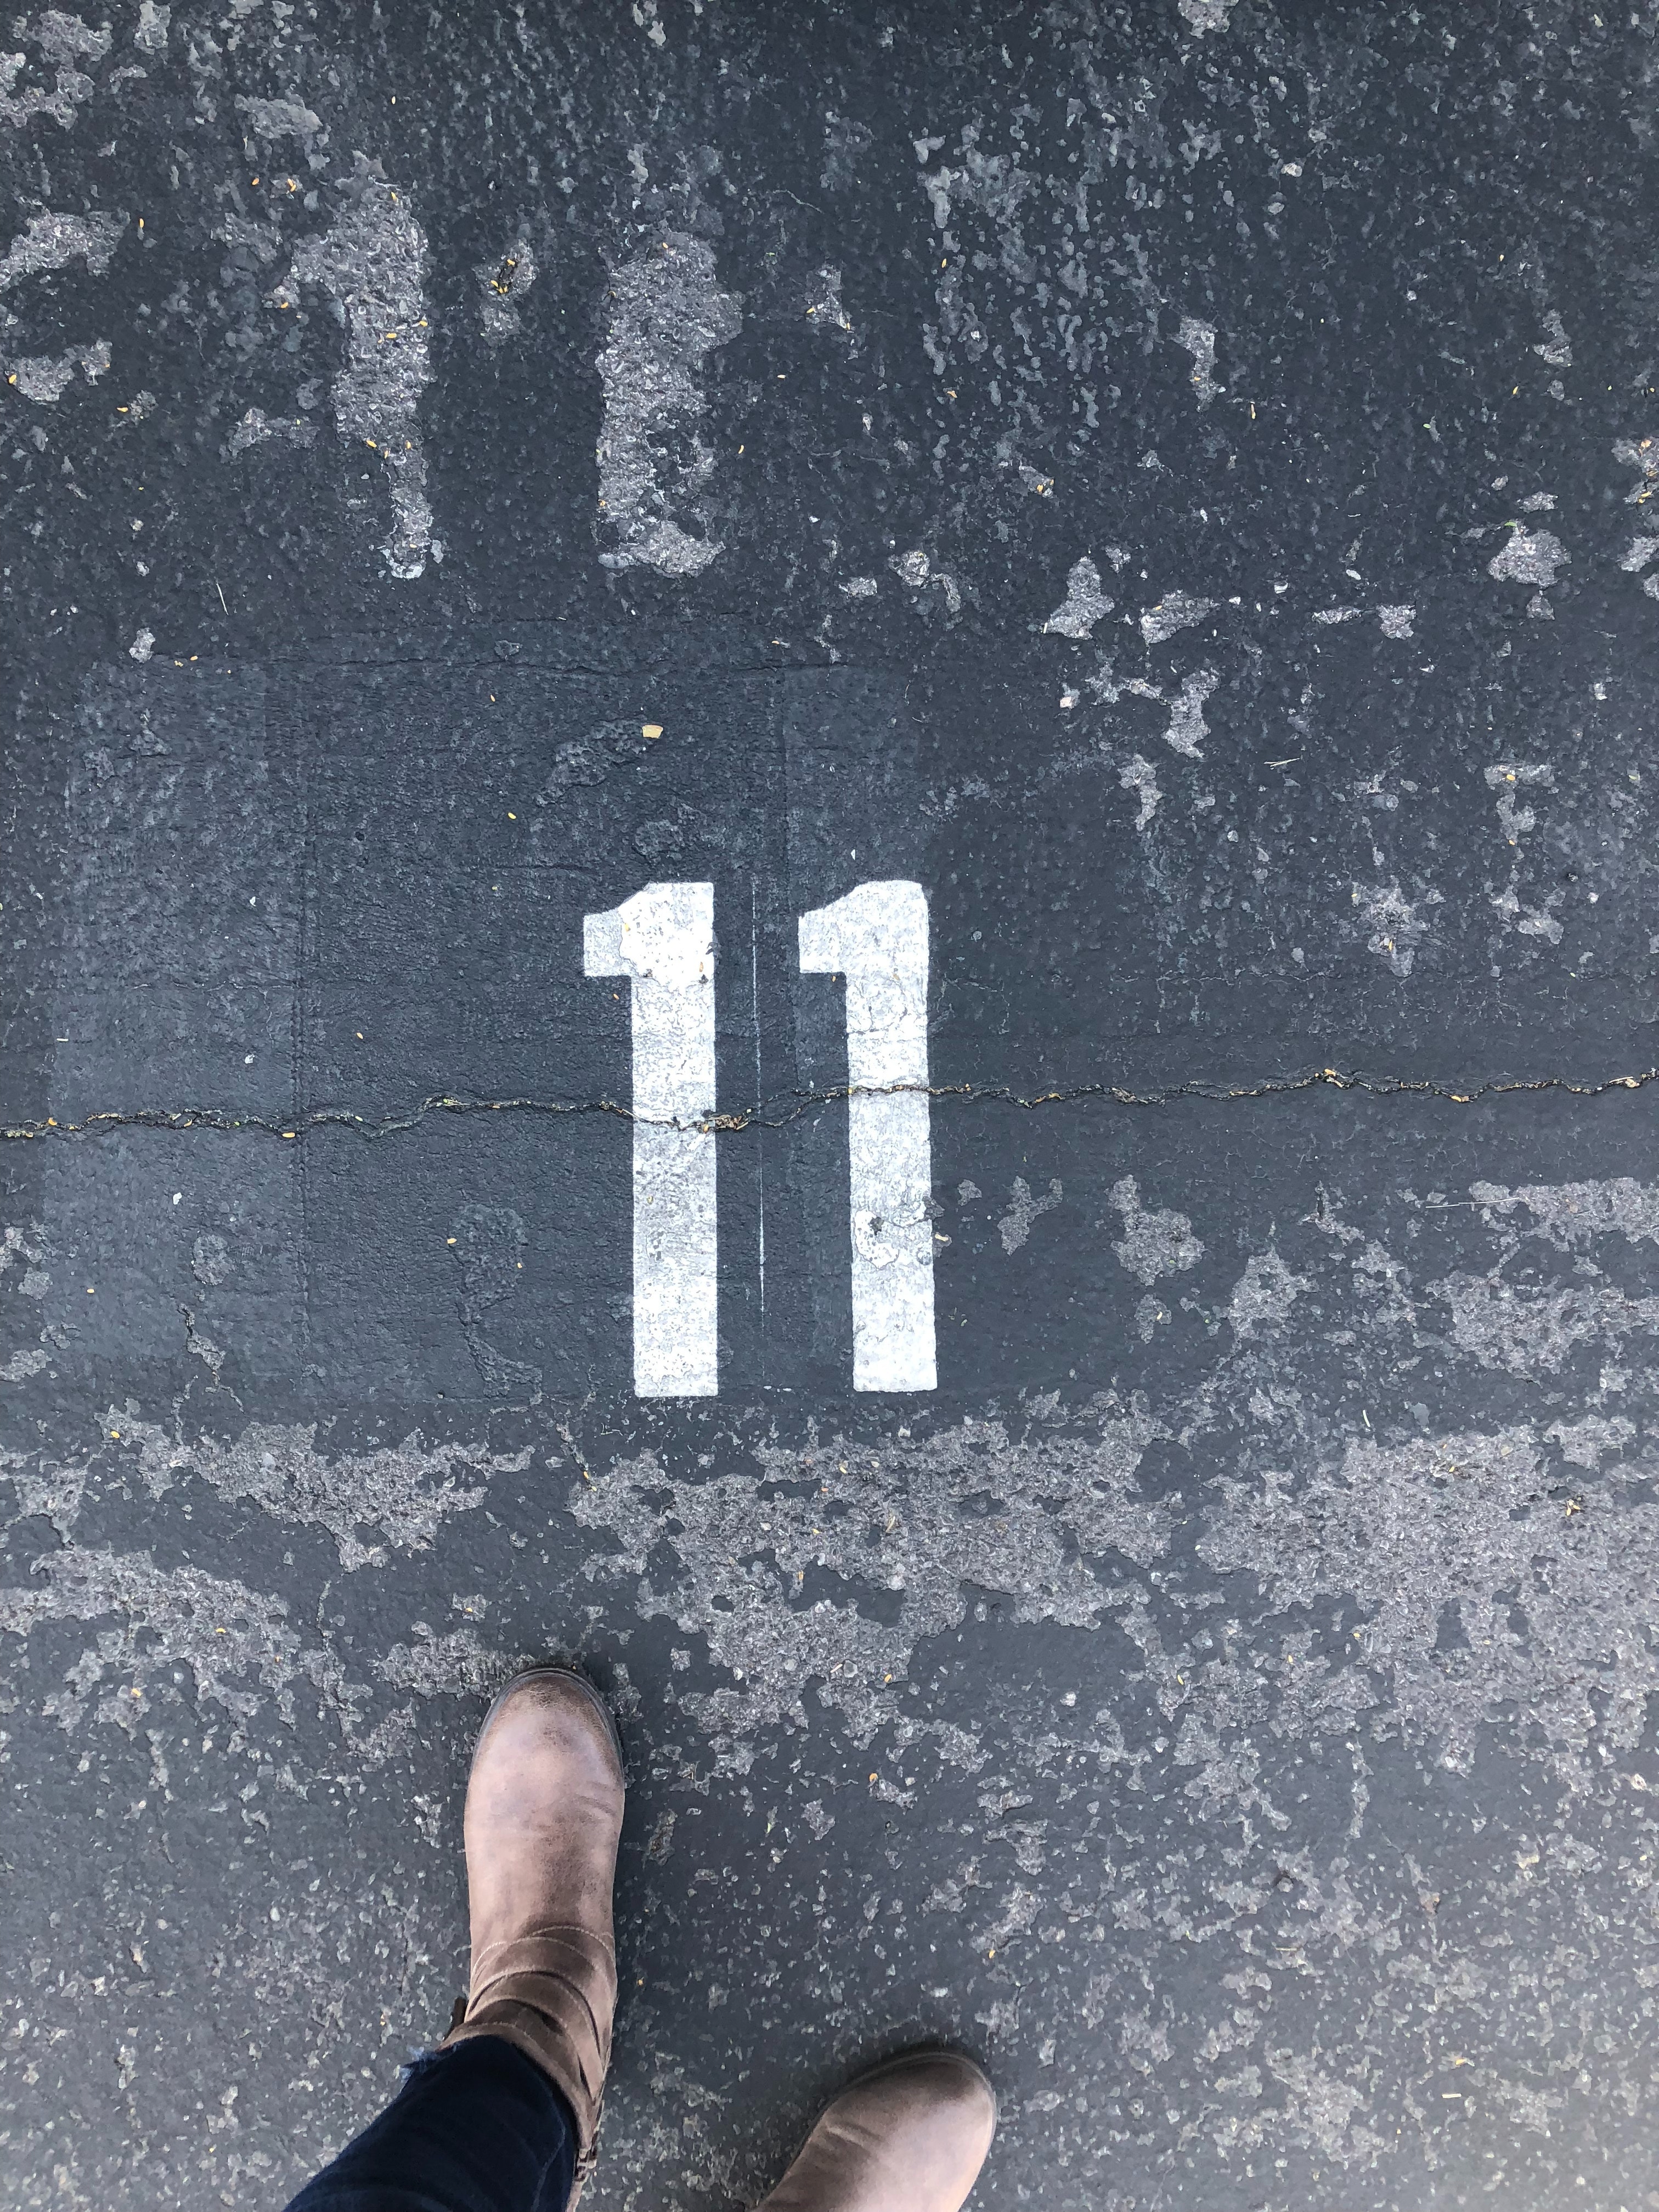 Person-standing-on-concrete-floor-with-number-11-paint-1655998.jpg